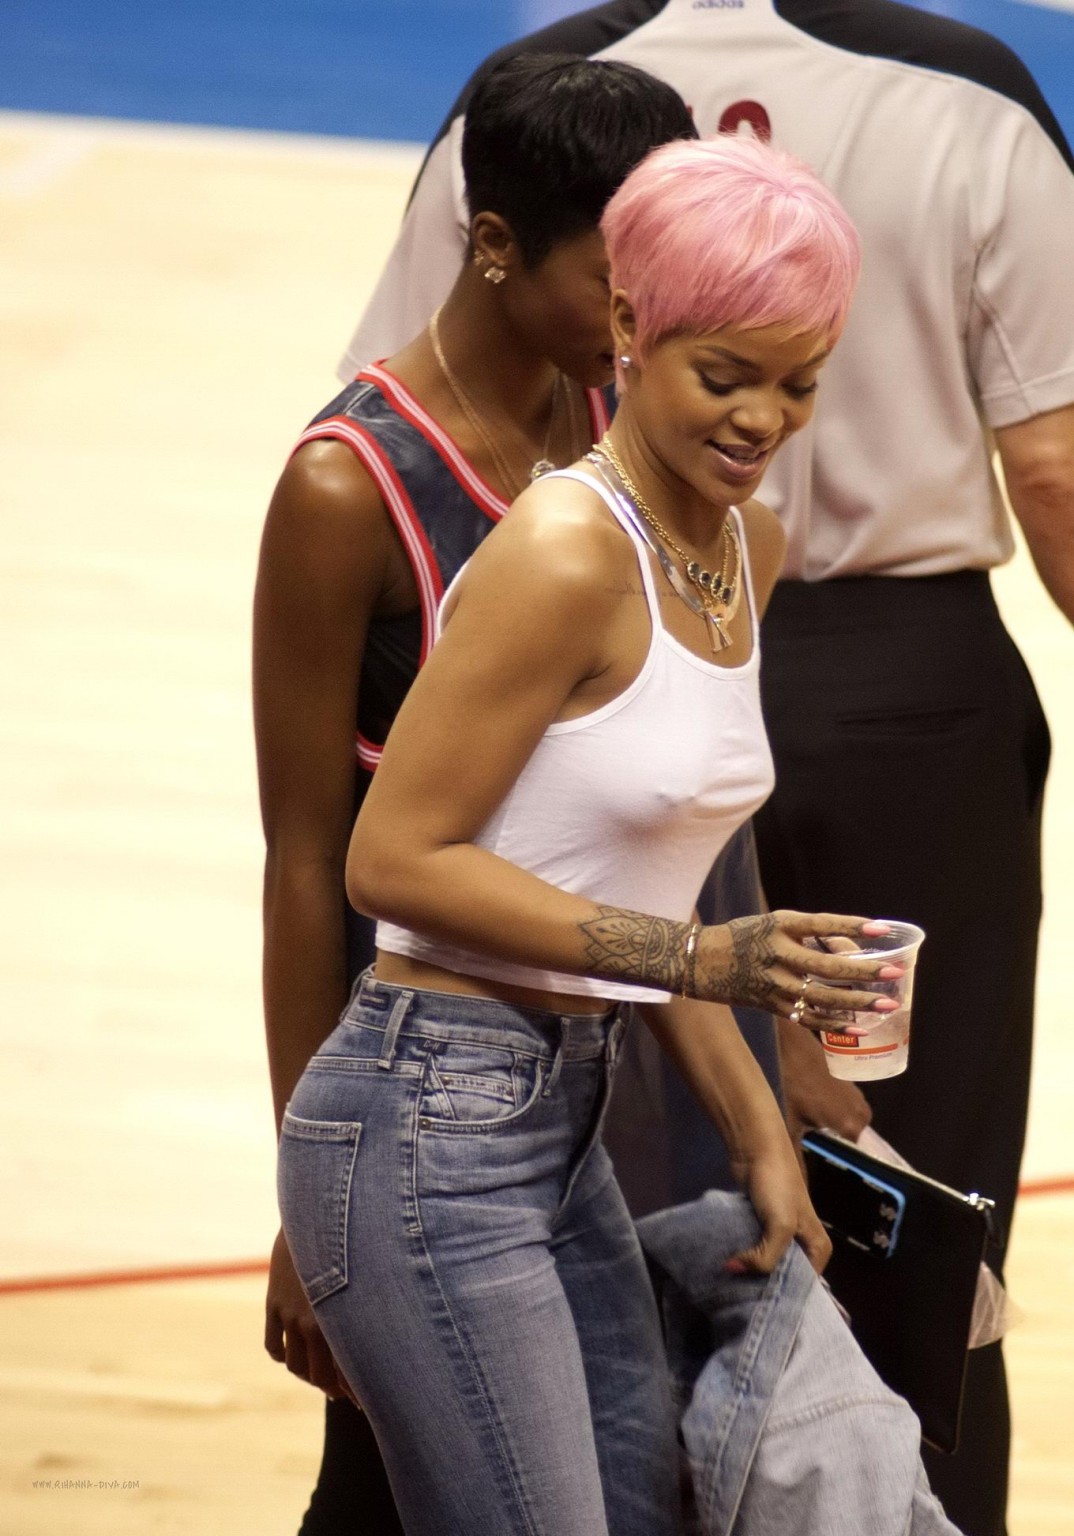 Rihanna braless wearing a white top at the Clippers game in LA #75196248